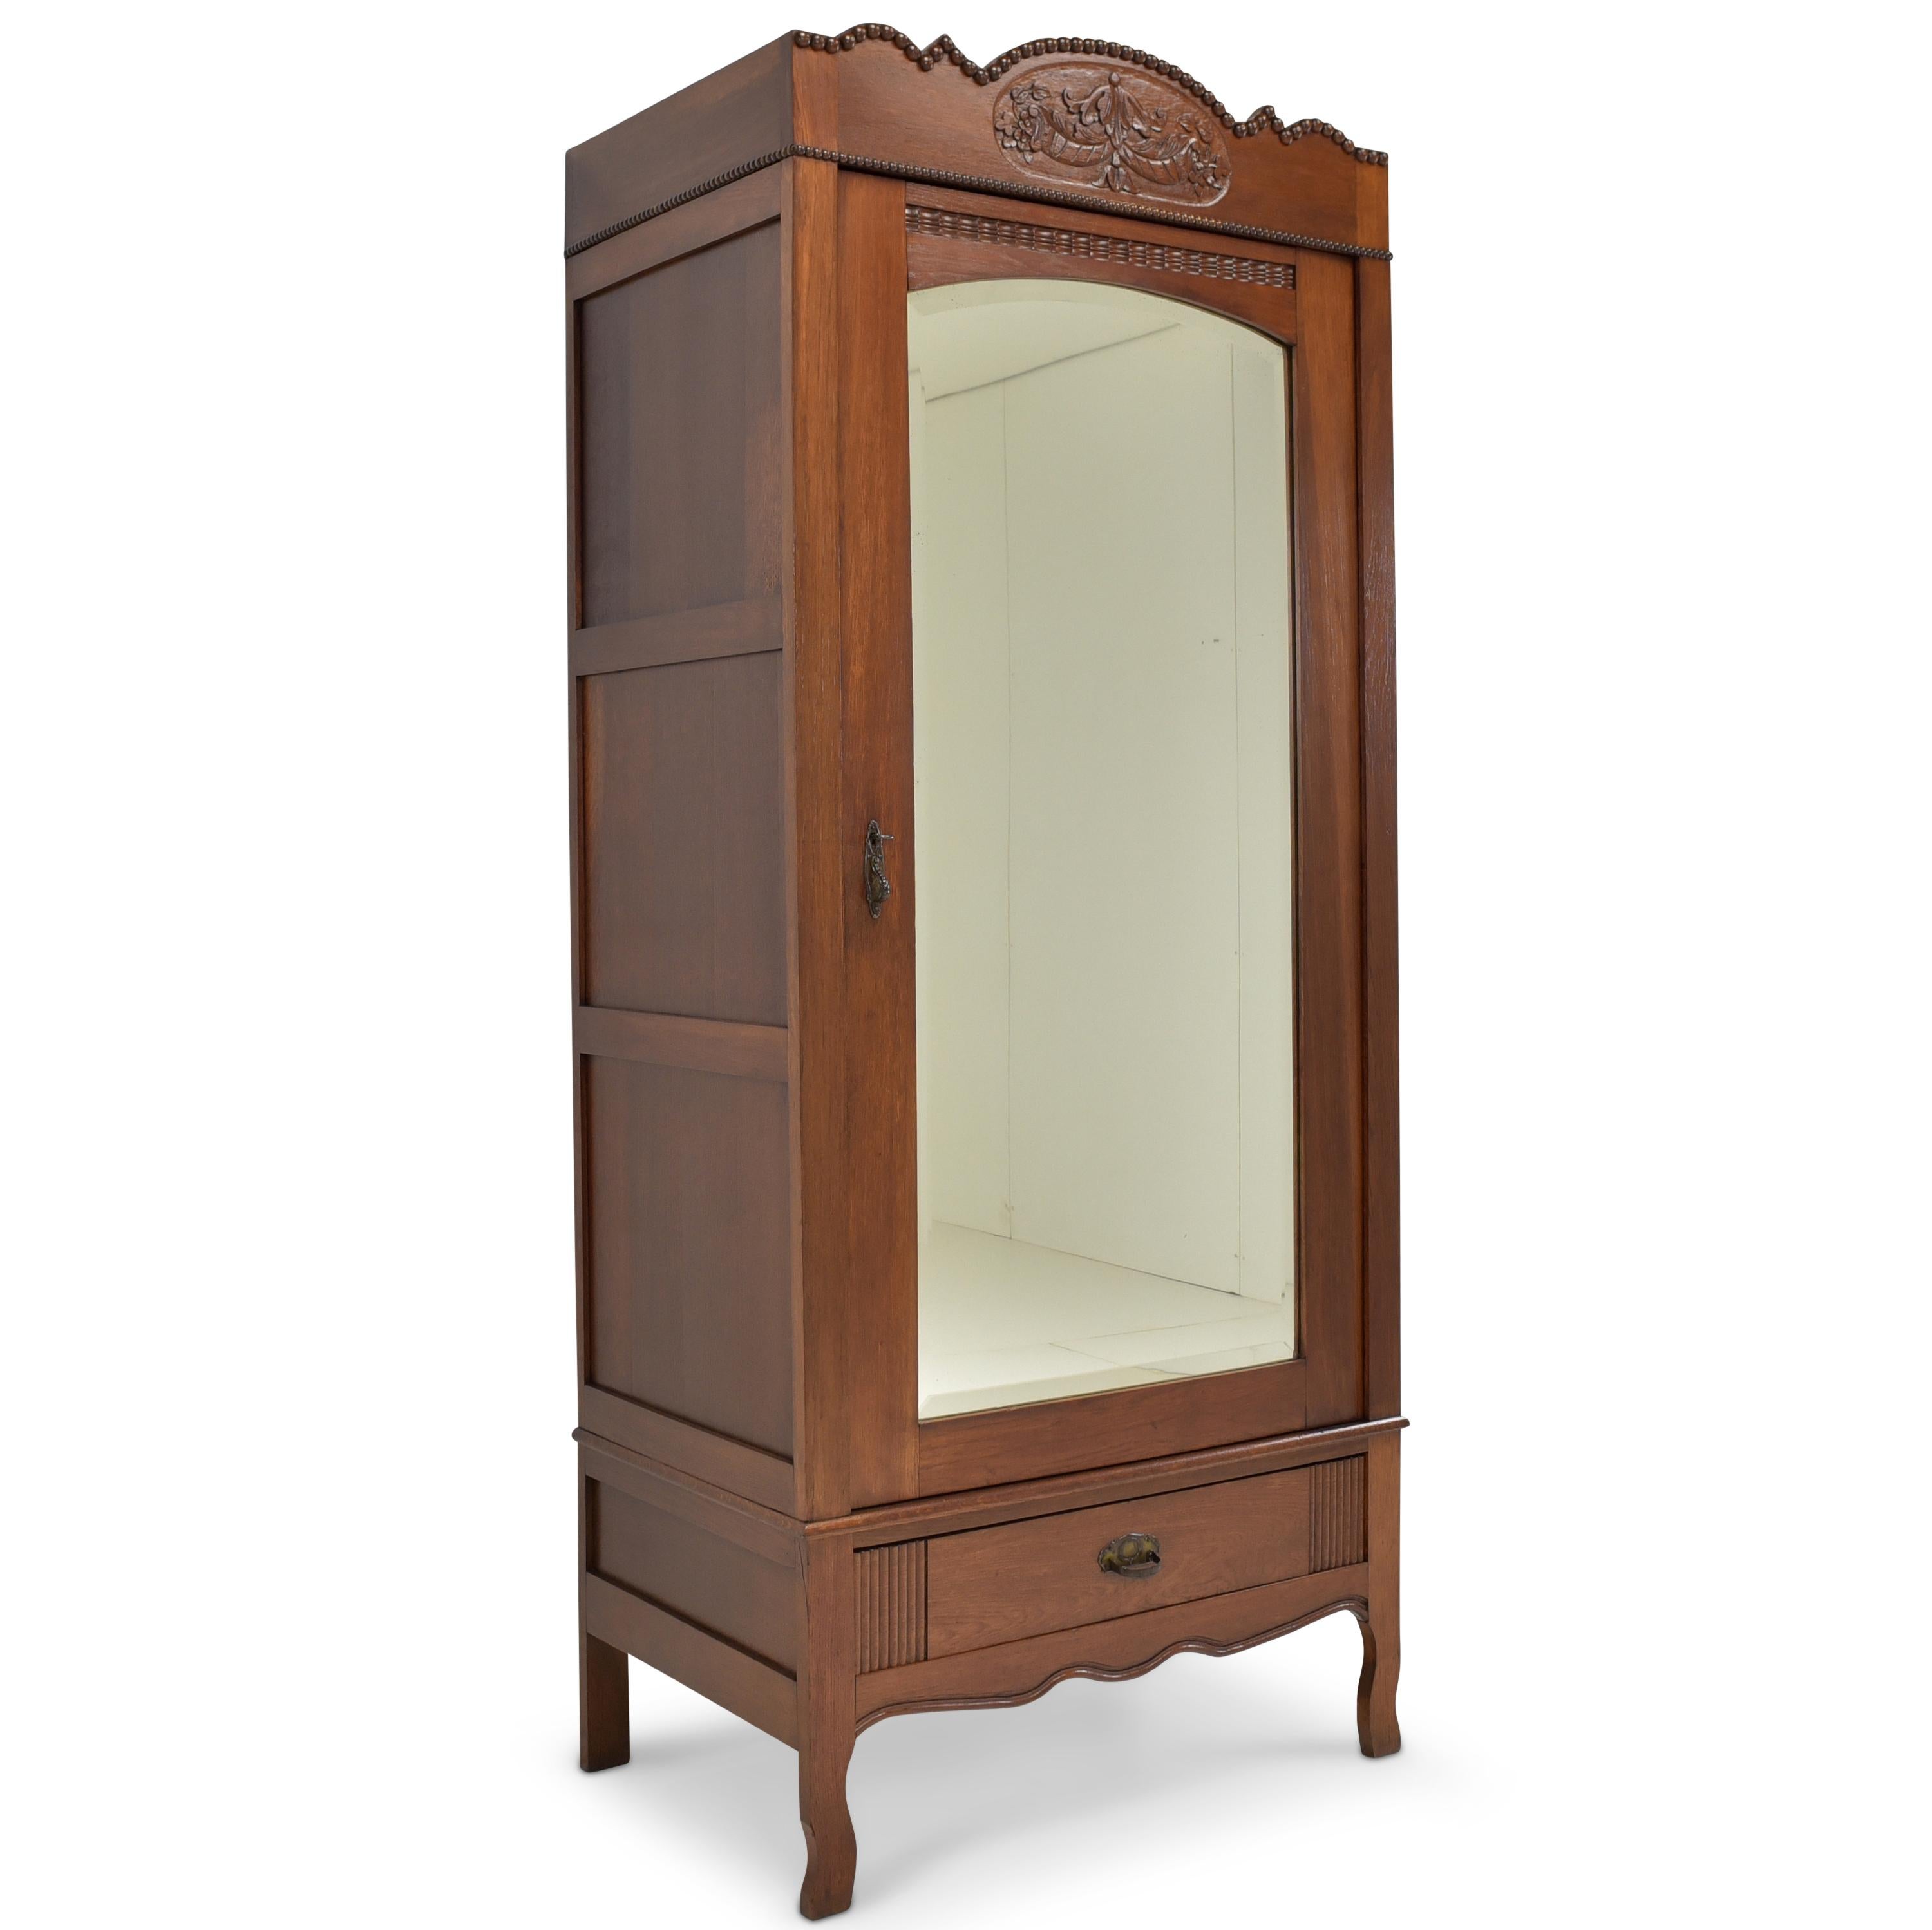 One-door wardrobe restored Art Deco oak floorboard narrow

Features:
Oak, mostly solid
Single-door model with mirror, drawer and five shelves
Solid softwood shelves, height adjustable
Drawer pronged
Original faceted mirror
Beautiful carved